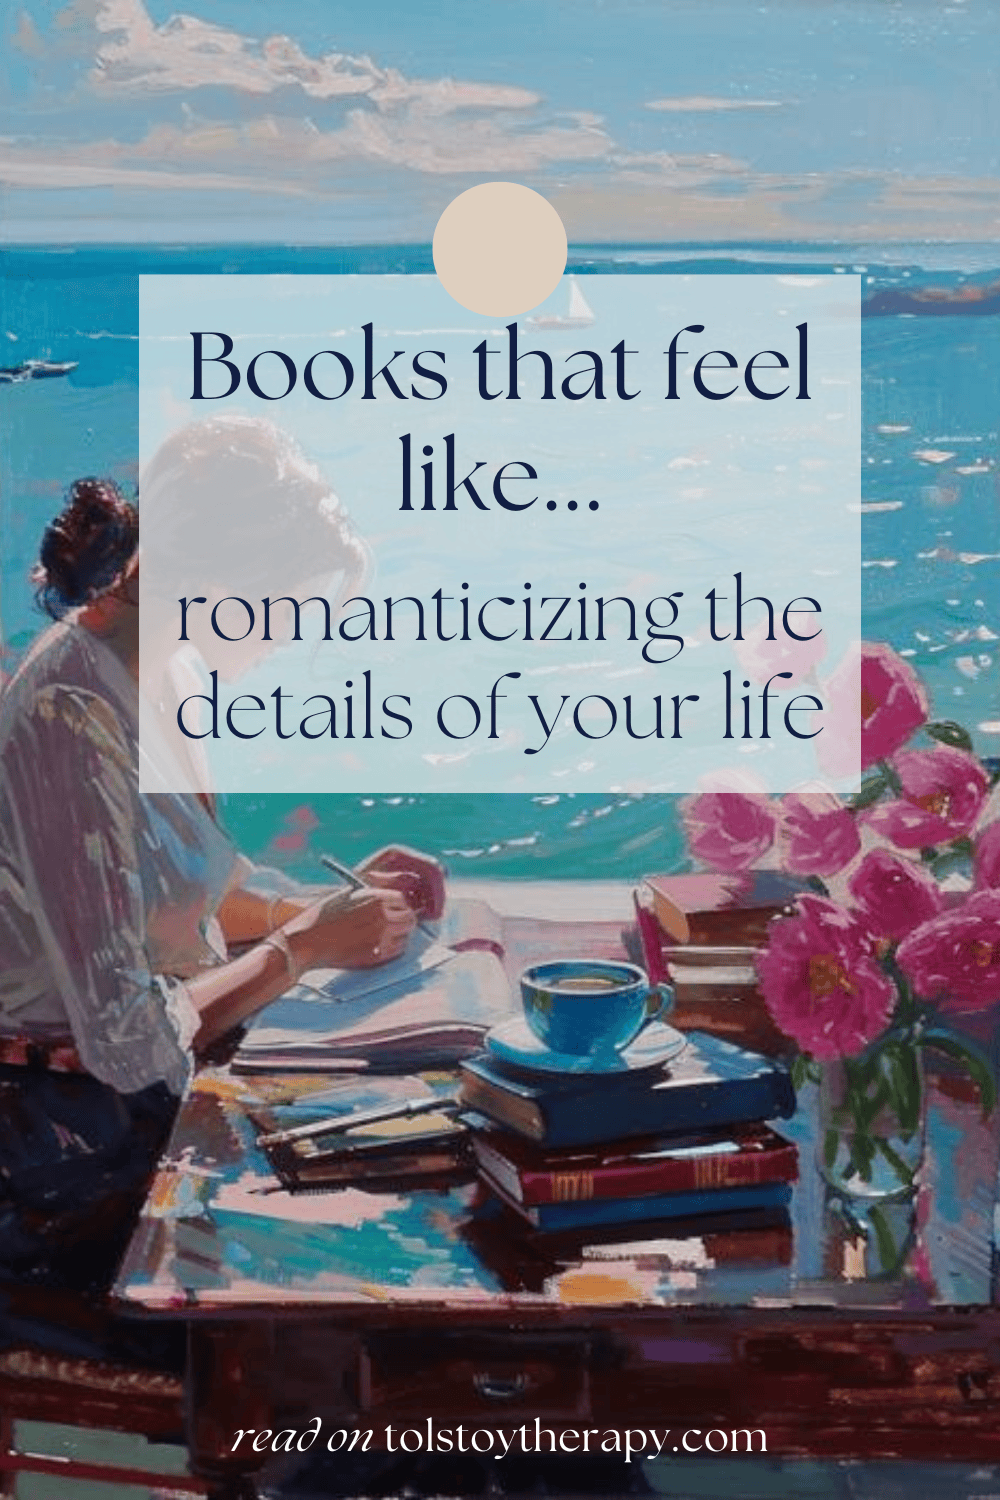 Books that feel like romanticizing the details of your life